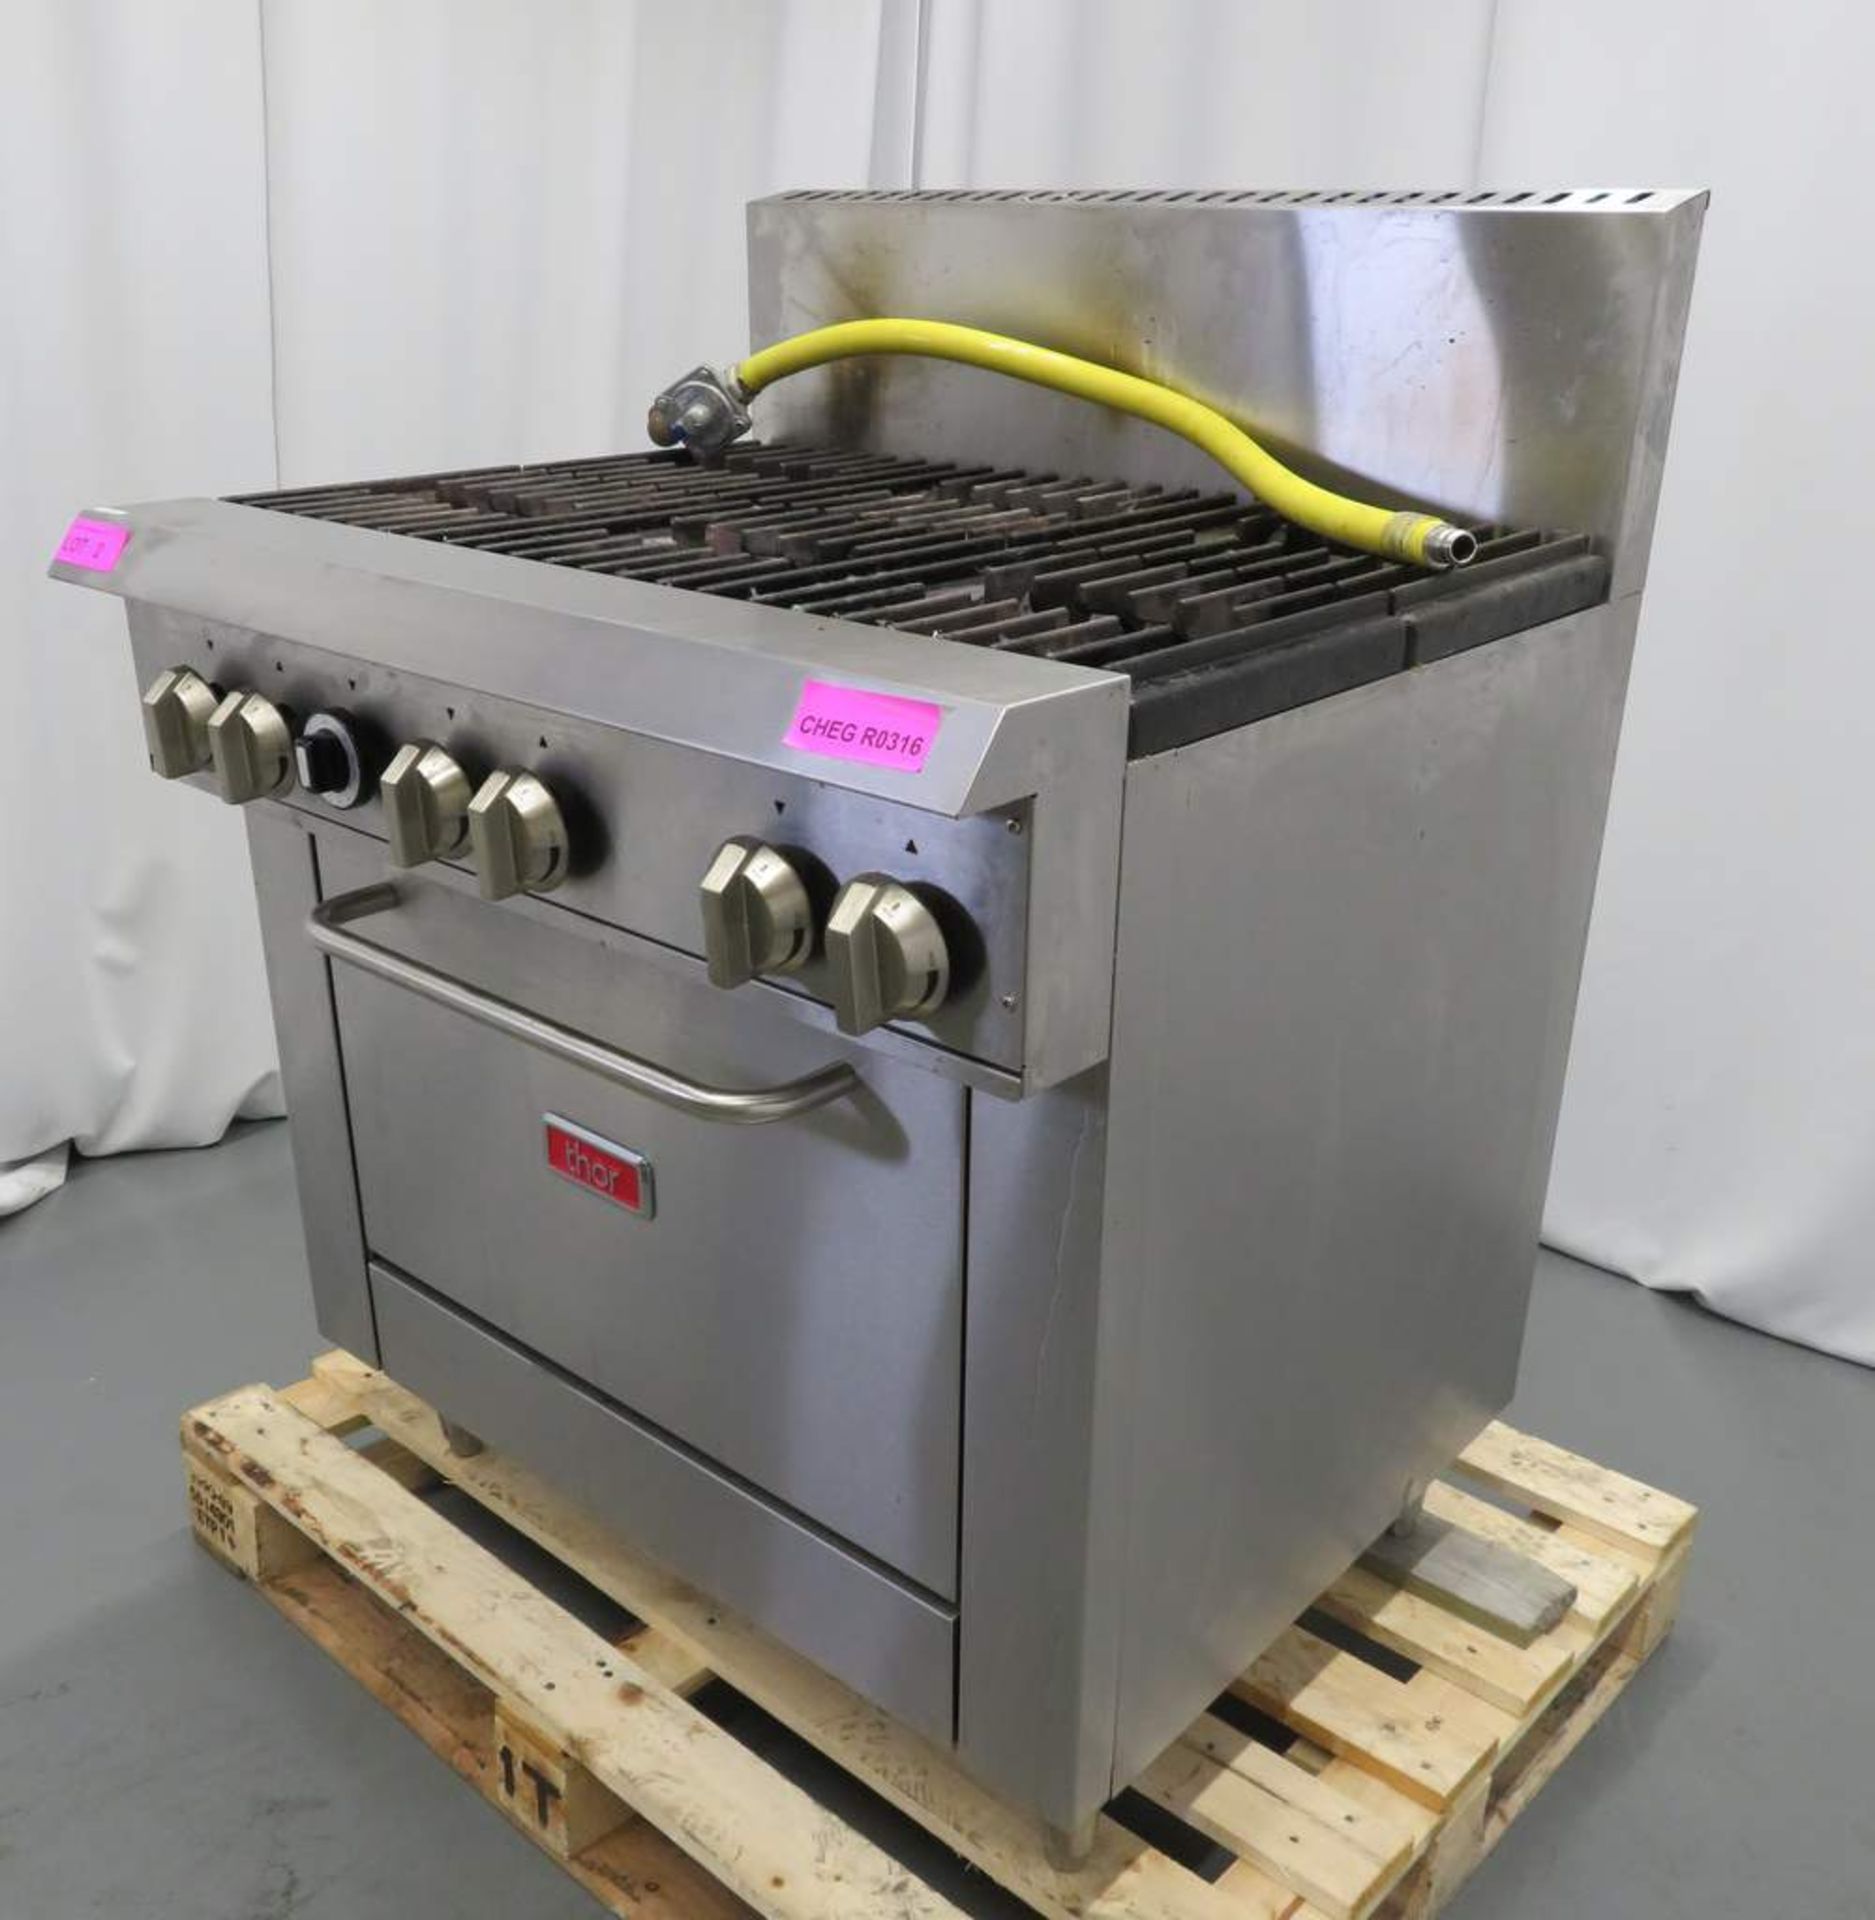 Thor 6 Ring Gas Range Oven 36". Natural Gas. Model: TR-6F. - Image 3 of 8